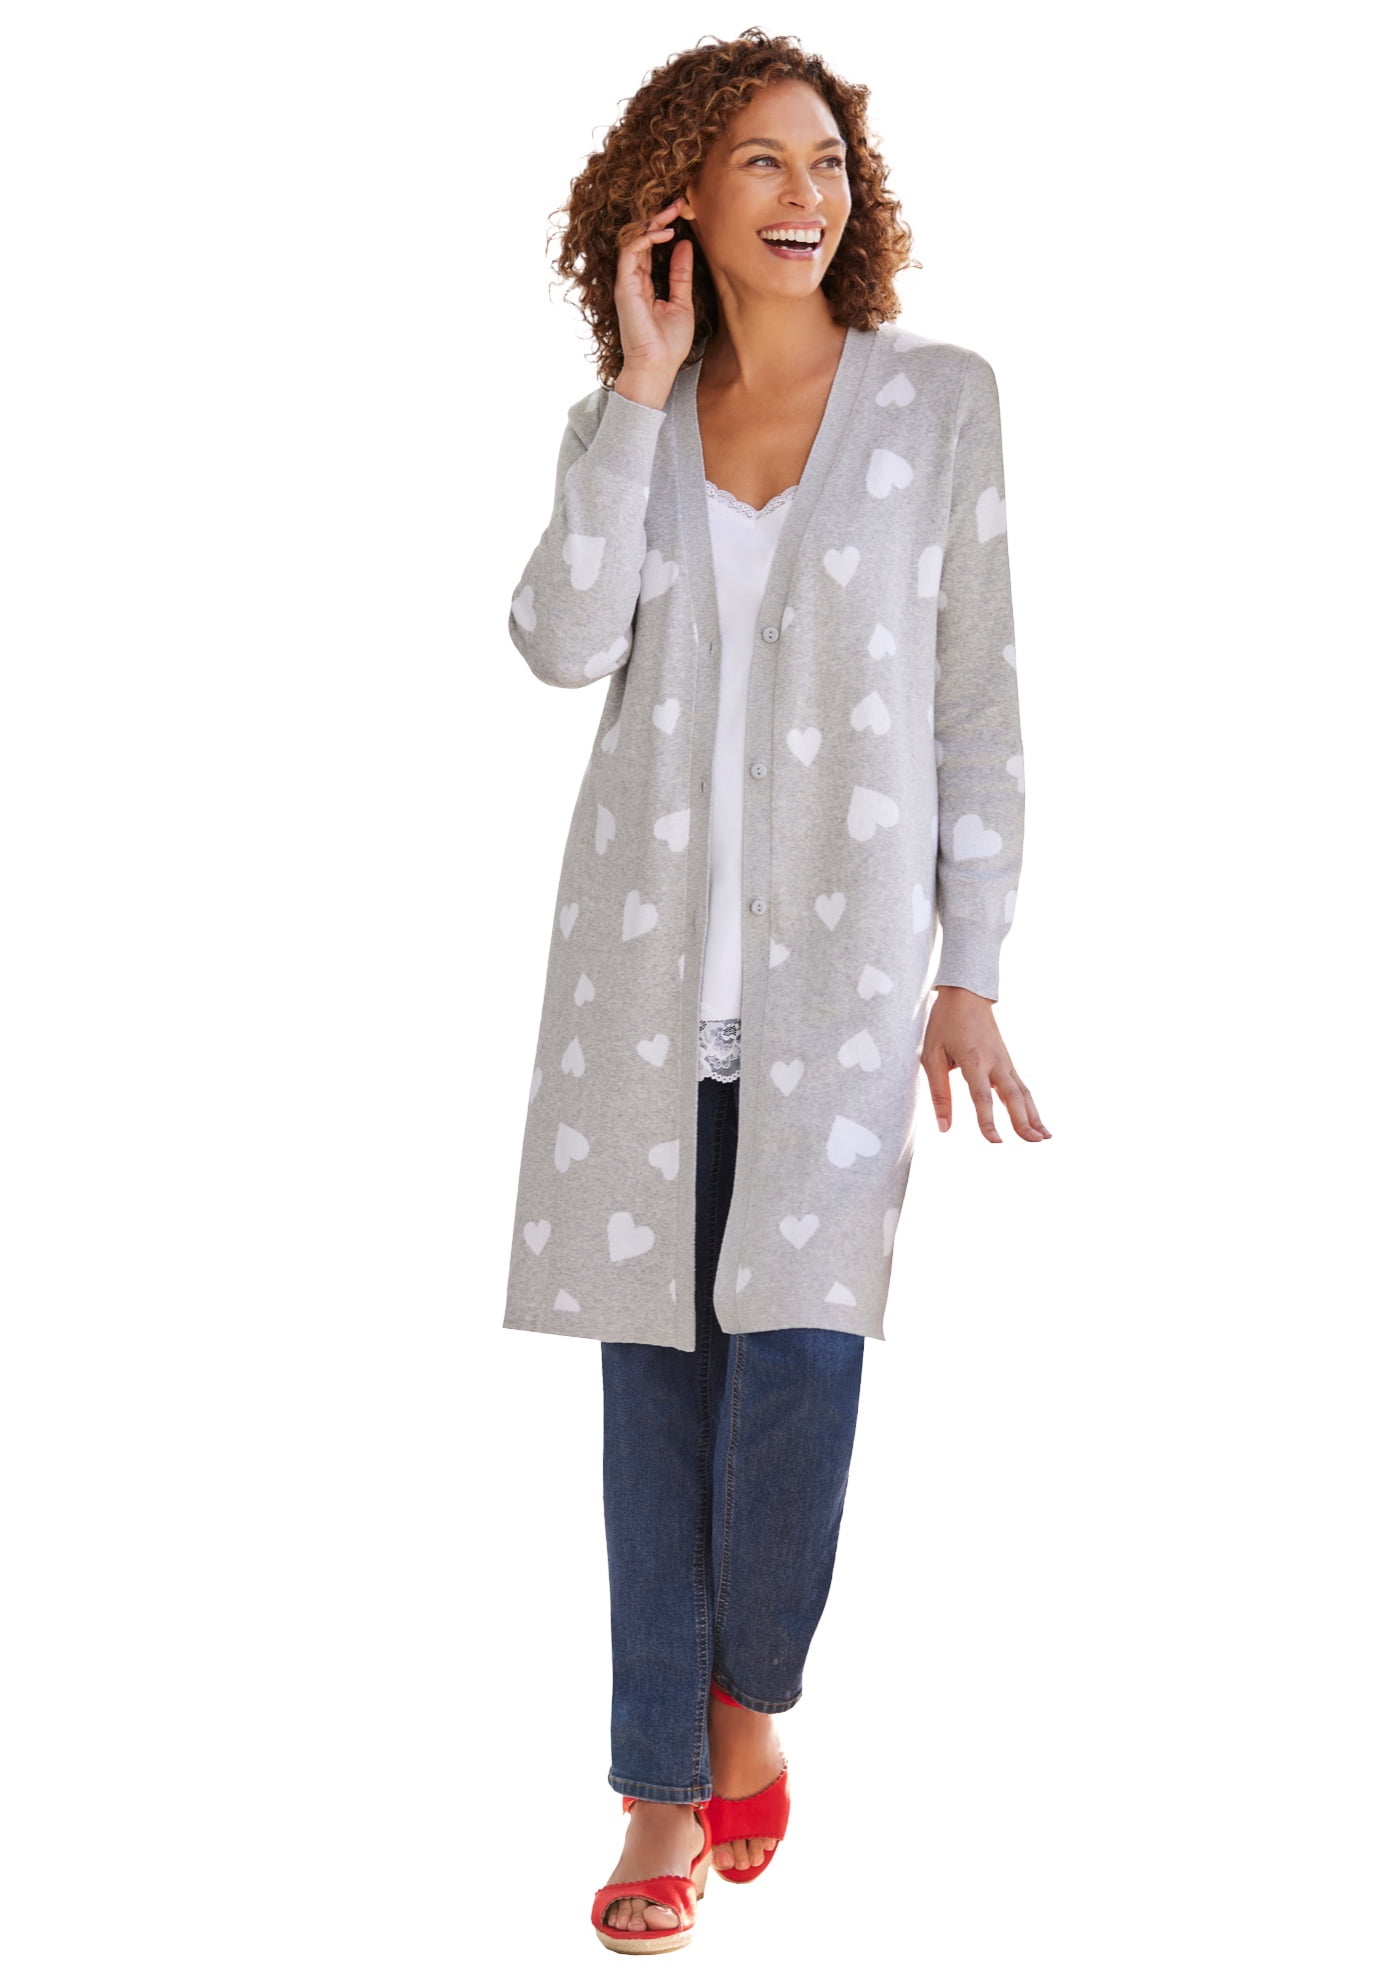 Woman Within Women's Plus Size Perfect Cotton Duster Cardigan Sweater 